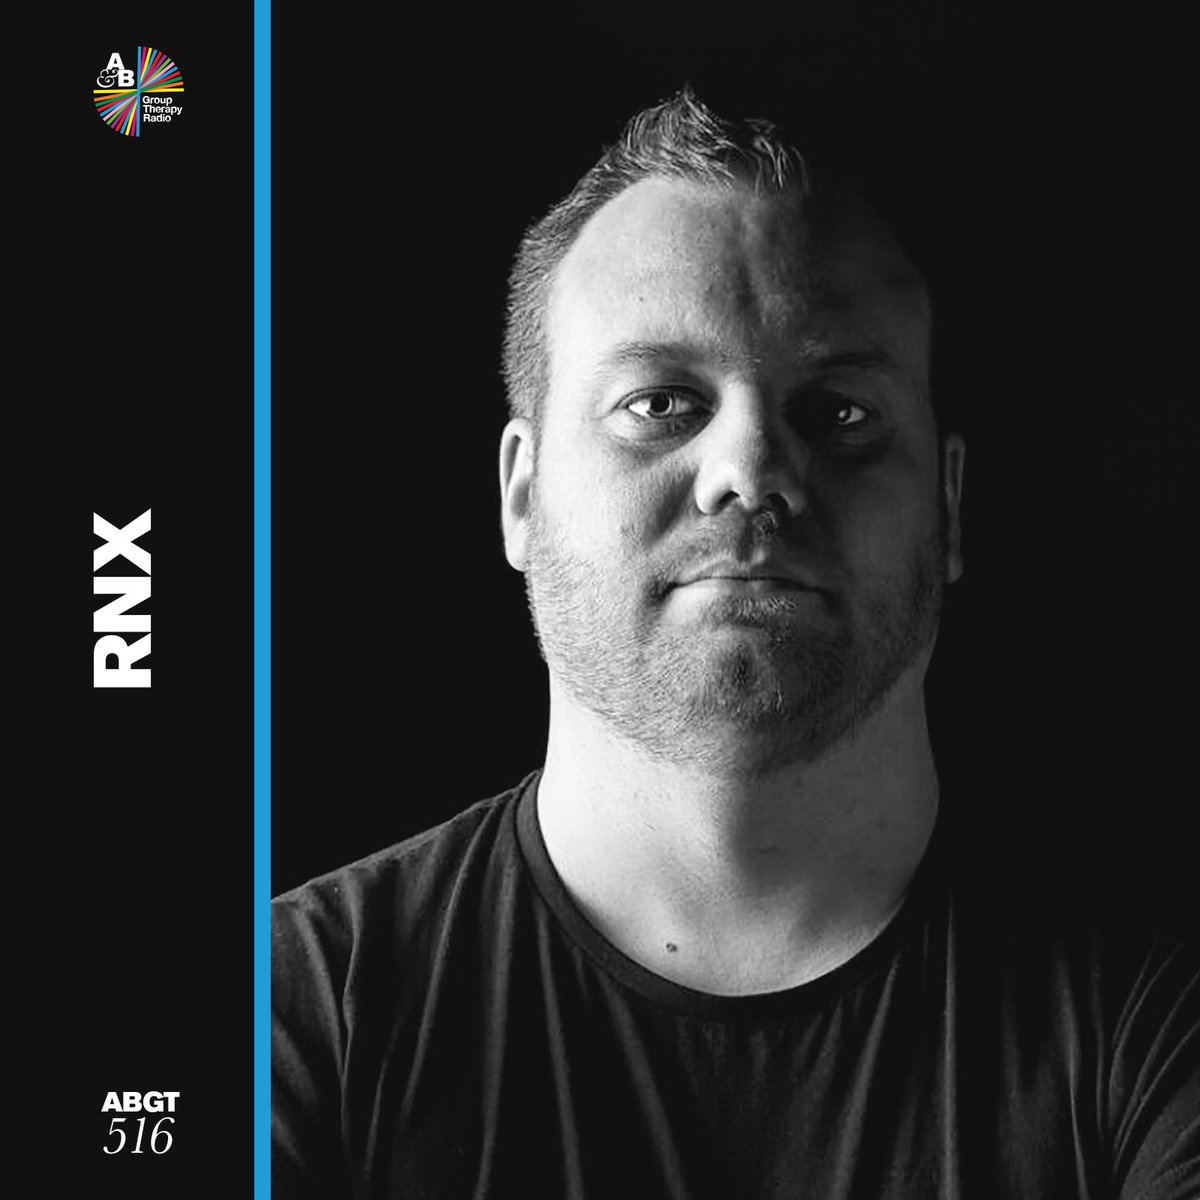 Tonight on Group Therapy, Norwegian trance producer @RobertNickson takes over the Guest Mix with his project RNX 🎵 Tune in at 7pm BST to get a sneak peek at the new album and hear the latest from @anjunabeats and @anjunadeep 💫